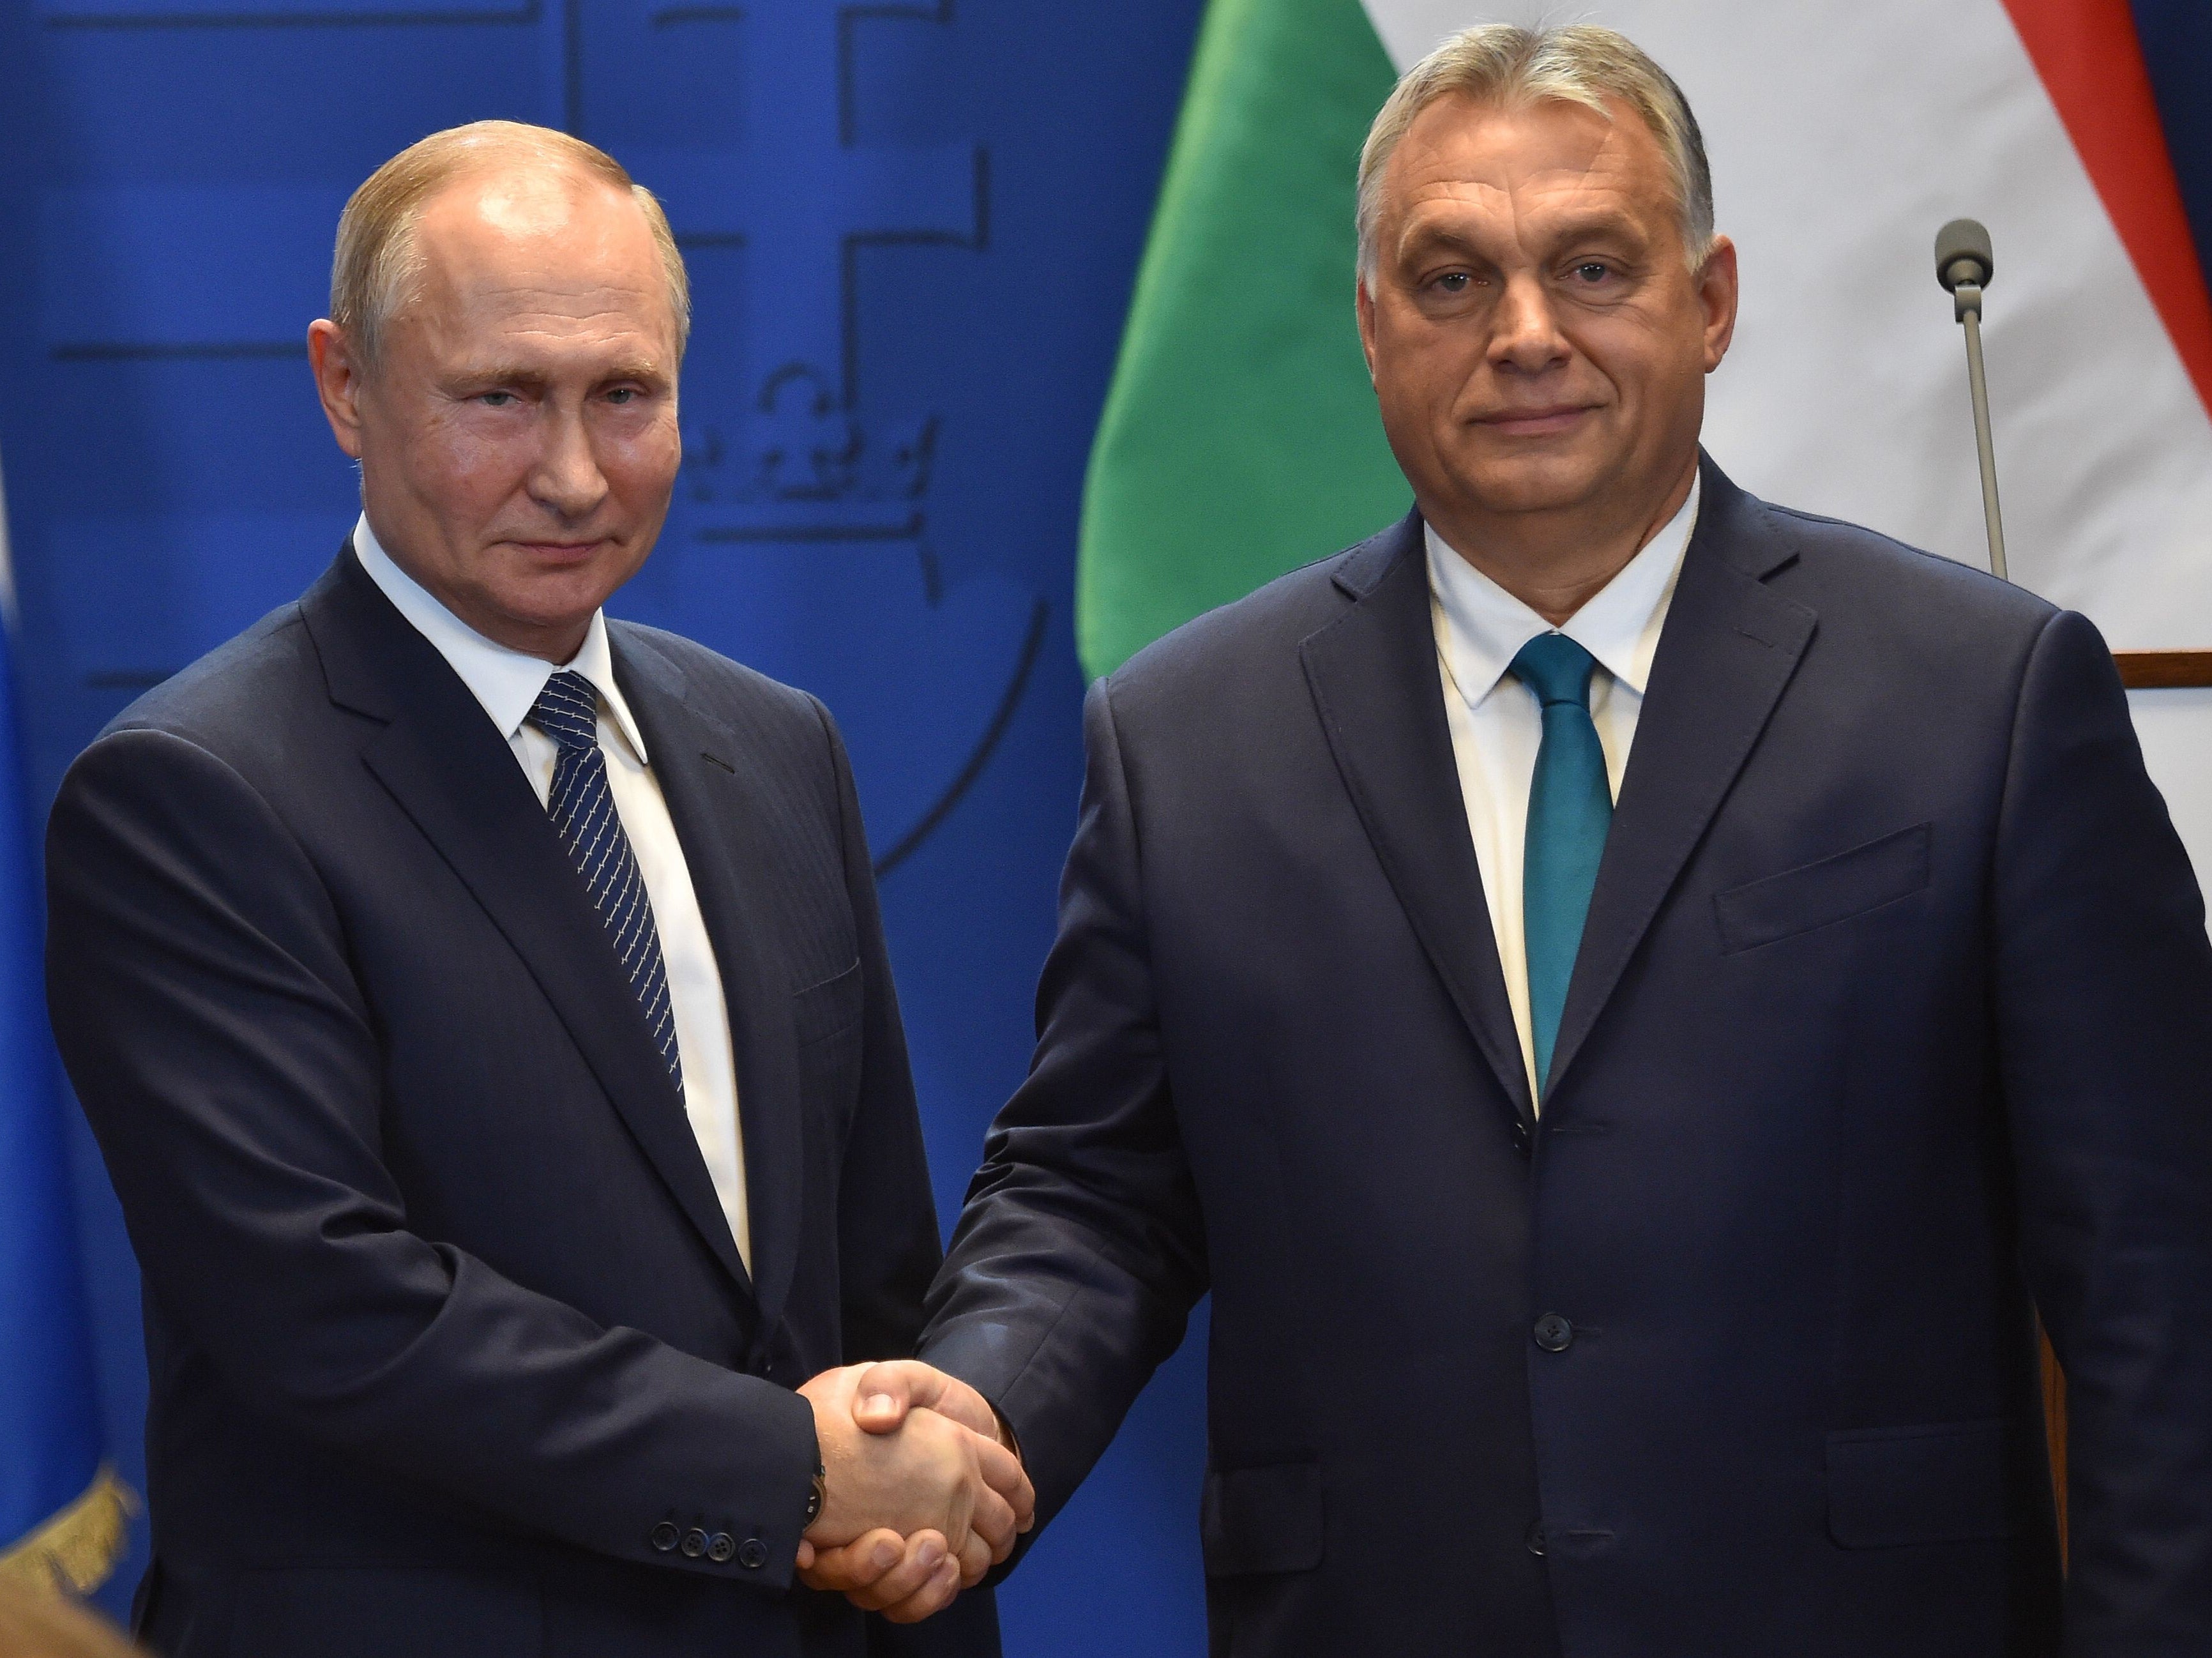 Russia’s Vladimir Putin and Hungary’s Viktor Orban shake hands after a meeting in Budapest in 2019